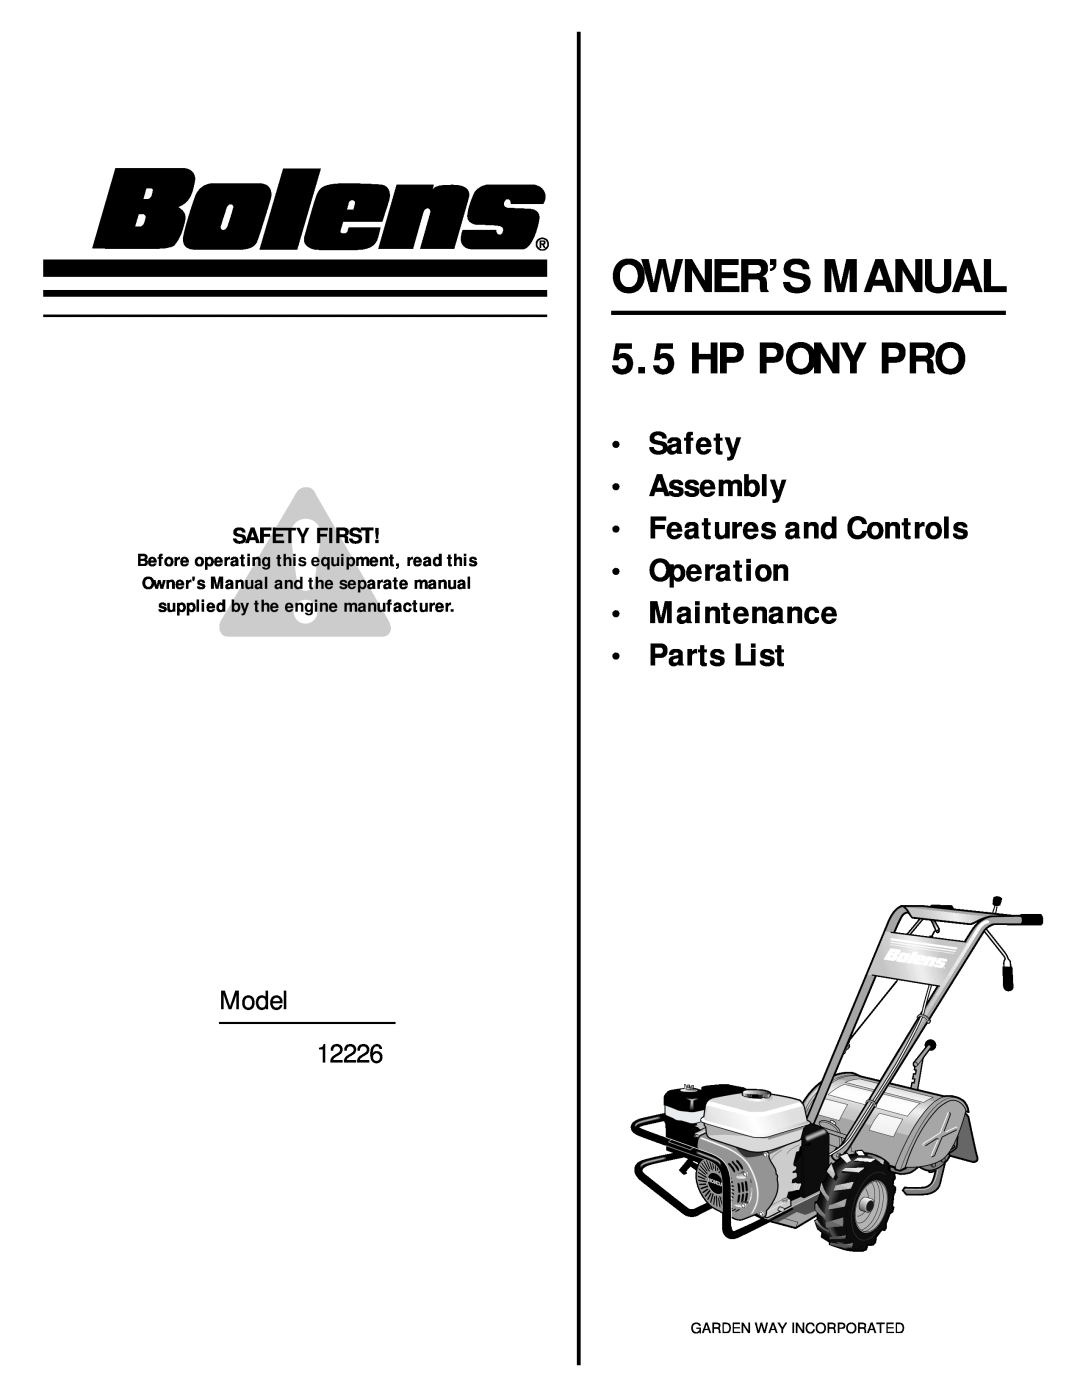 Bolens 12226 owner manual Safety First, Safety Assembly Features and Controls Operation Maintenance, Parts List, Model 